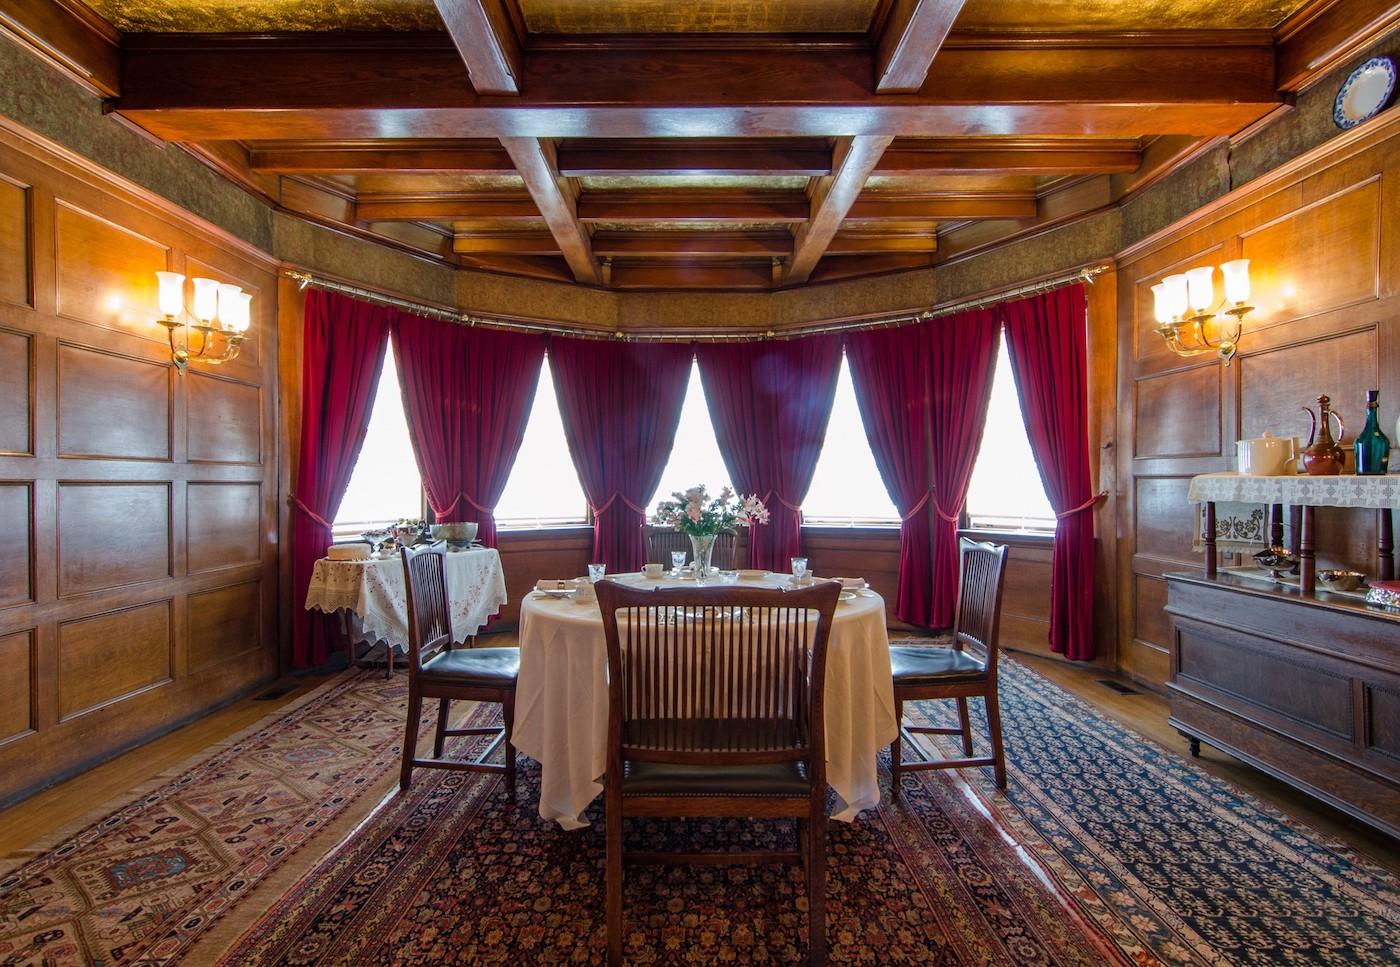 The wood-filled, rounded dining room of Glessner House